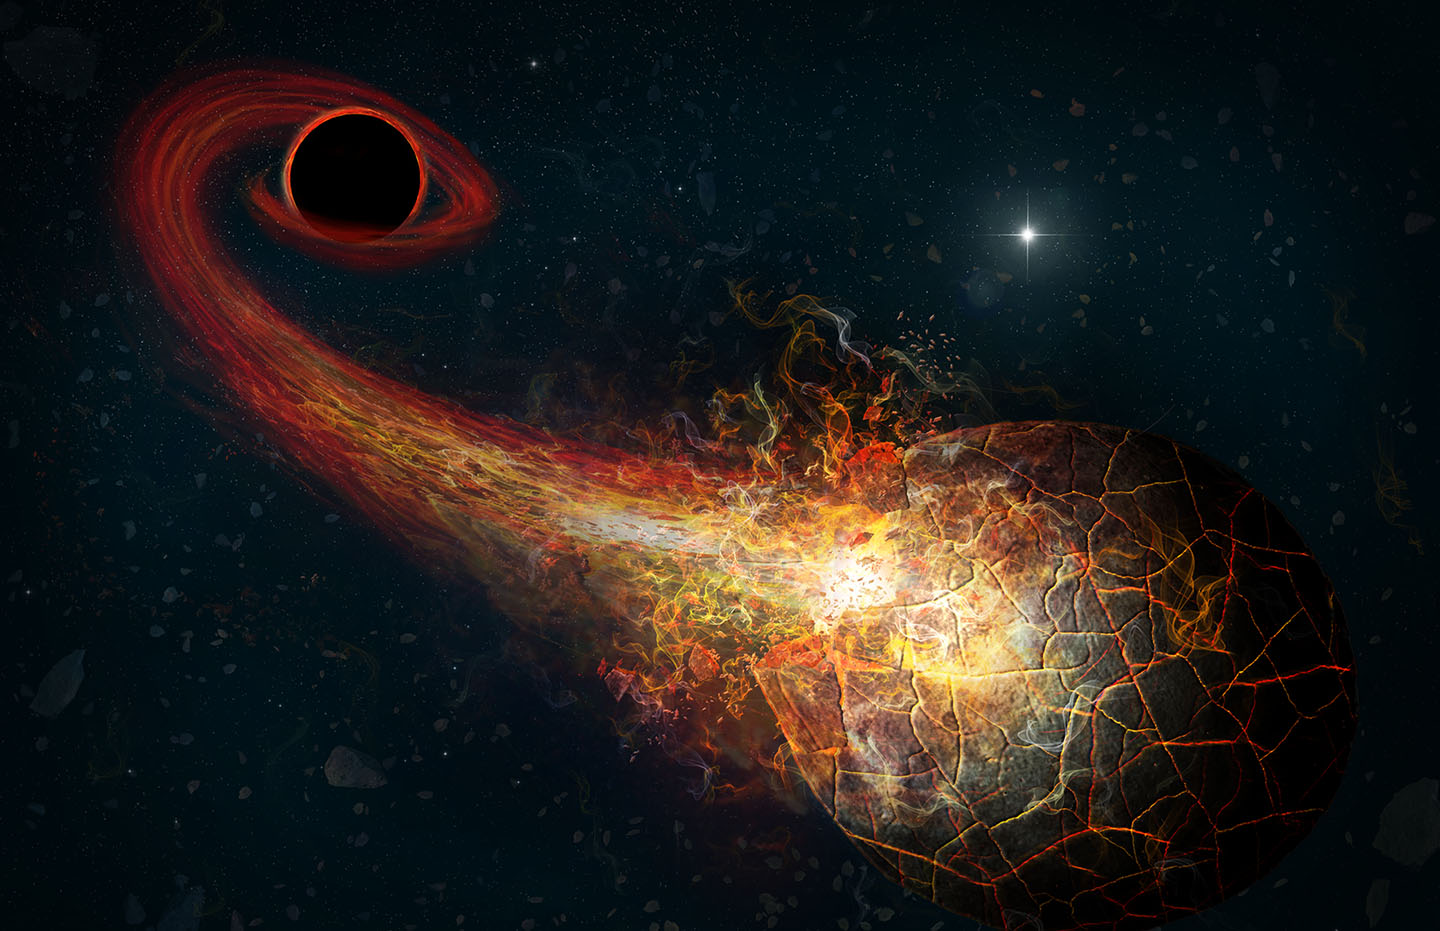 Artist's conception of a comet getting destroyed by a black hole. New research suggests we can detect such encounters from Earth, pointing to the presence of this hypothesised black hole.  (Image: M. Weiss)